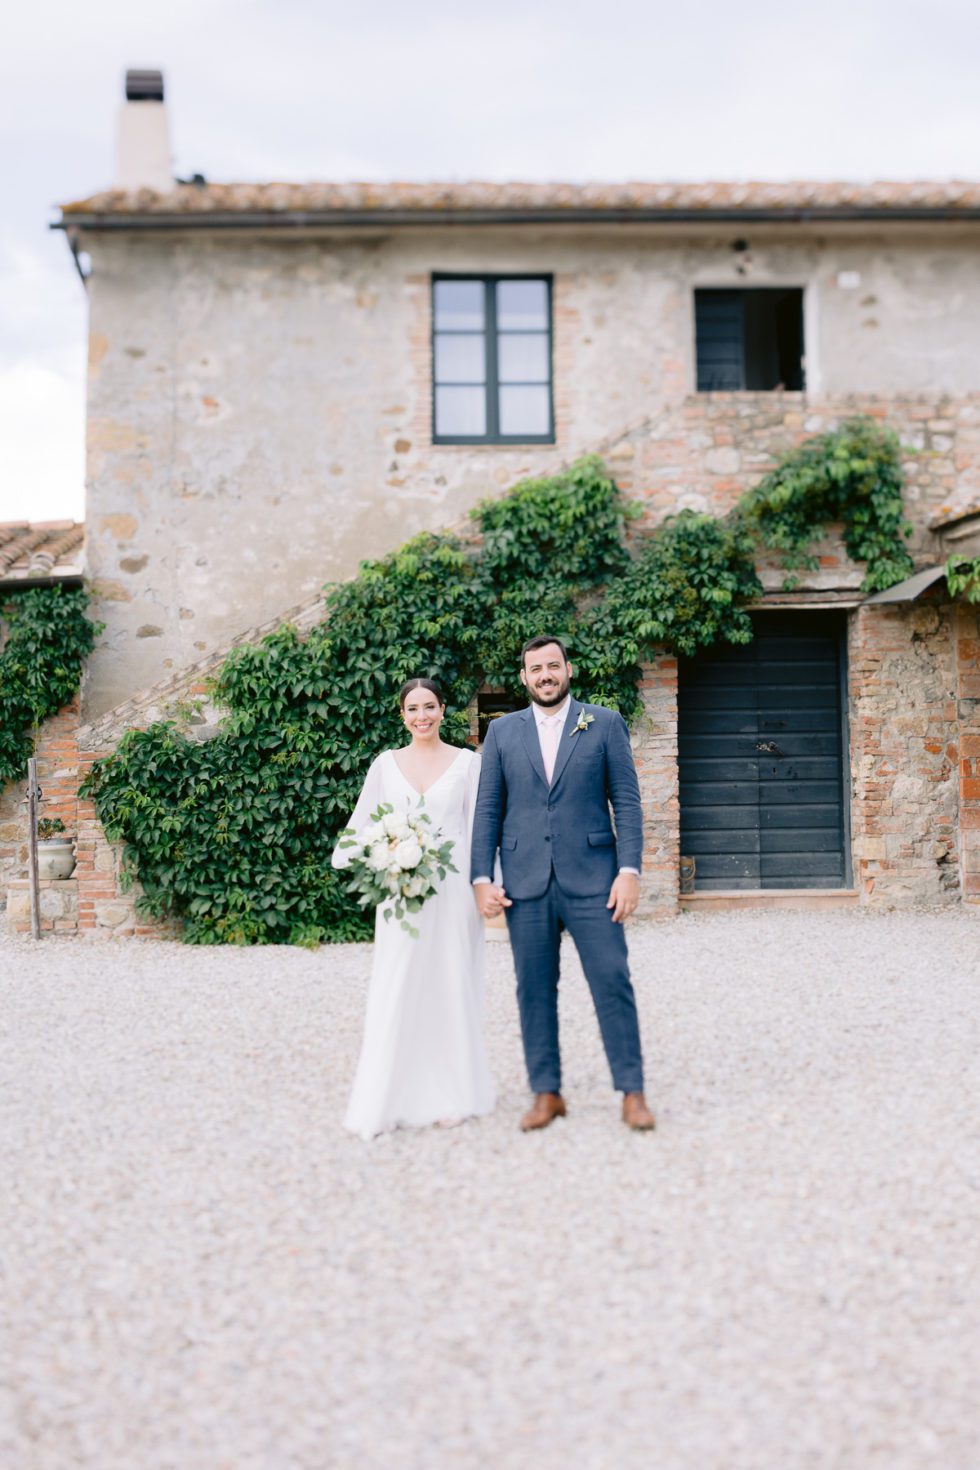 Couple posing for a portrait in front of Locanda in Tuscany